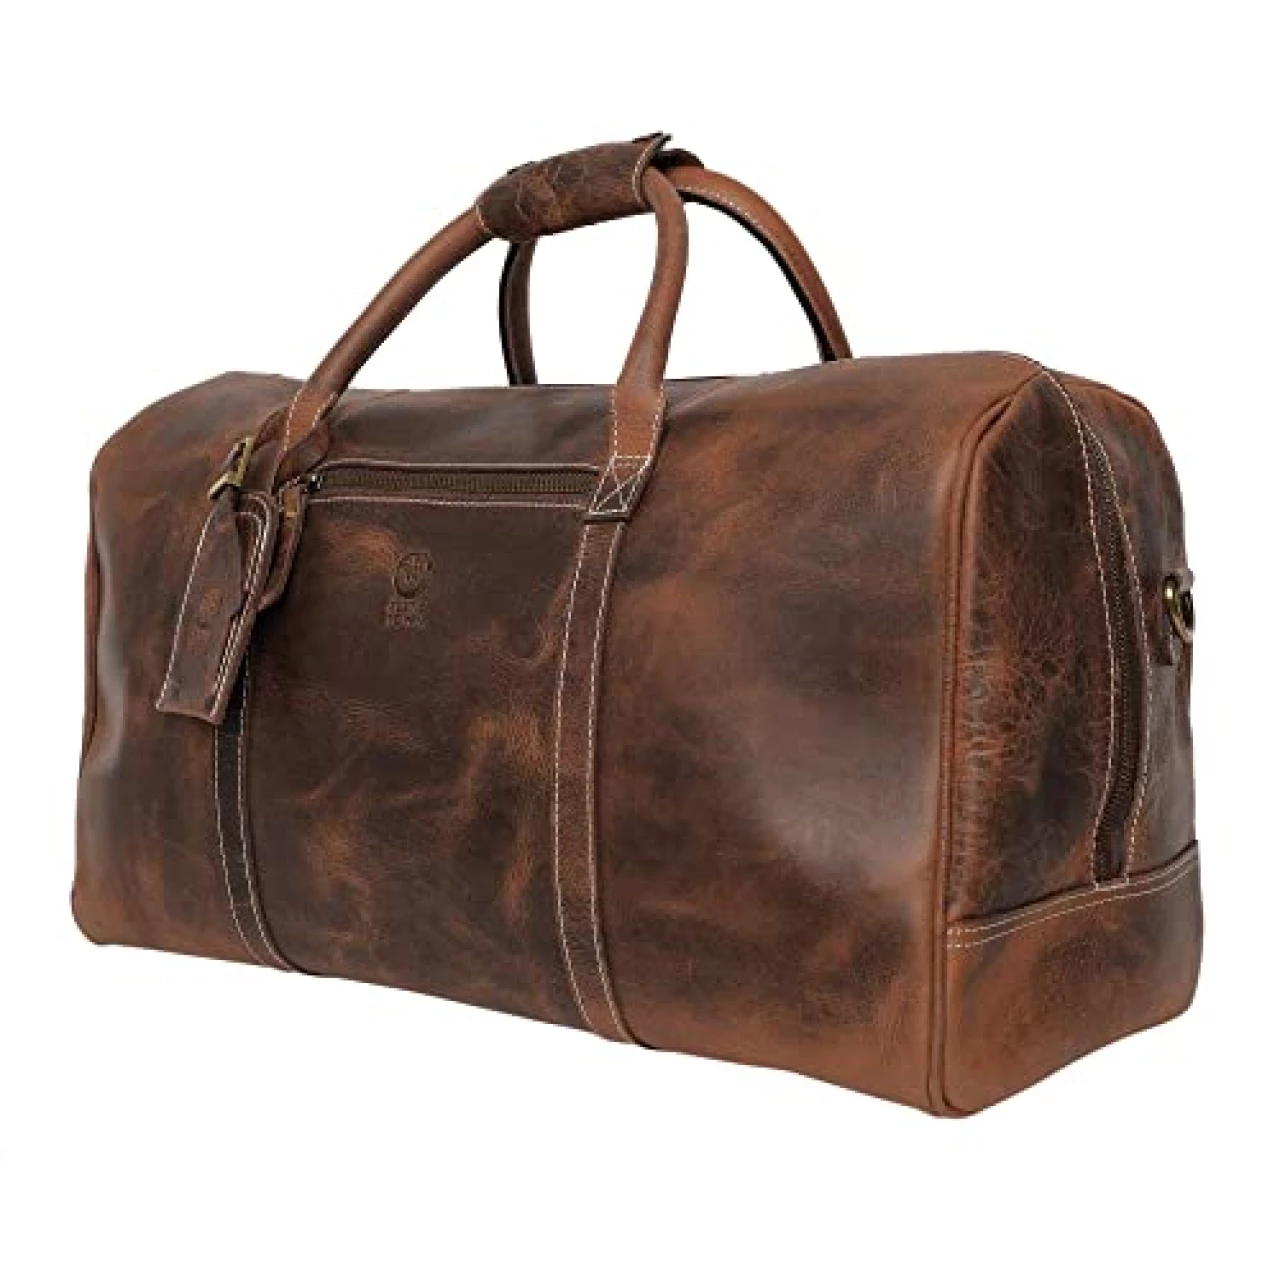 Handmade Leather Carry On Bag - Airplane Underseat Travel Duffel Bags By Rustic Town (Mulberry) Medium